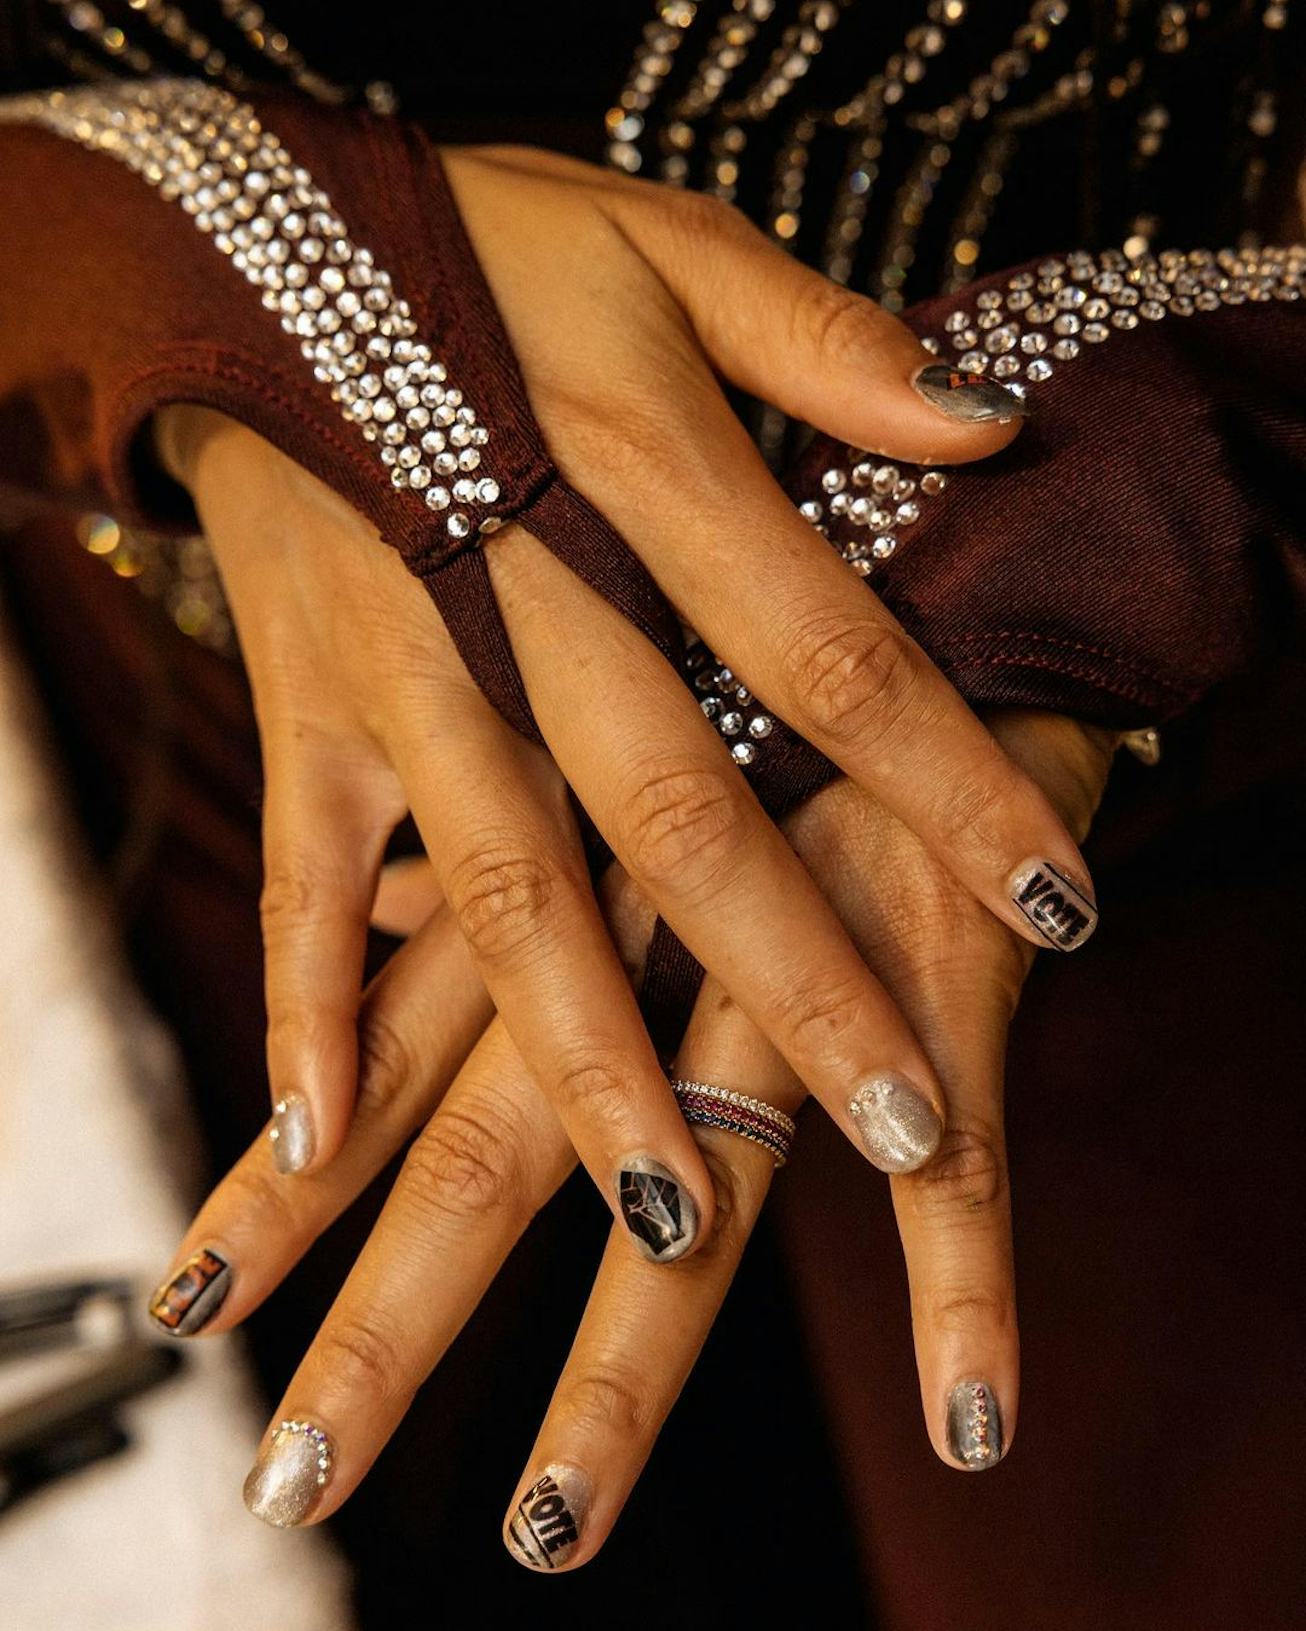 Alicia Keys showing off her nail designs, encouraging voting